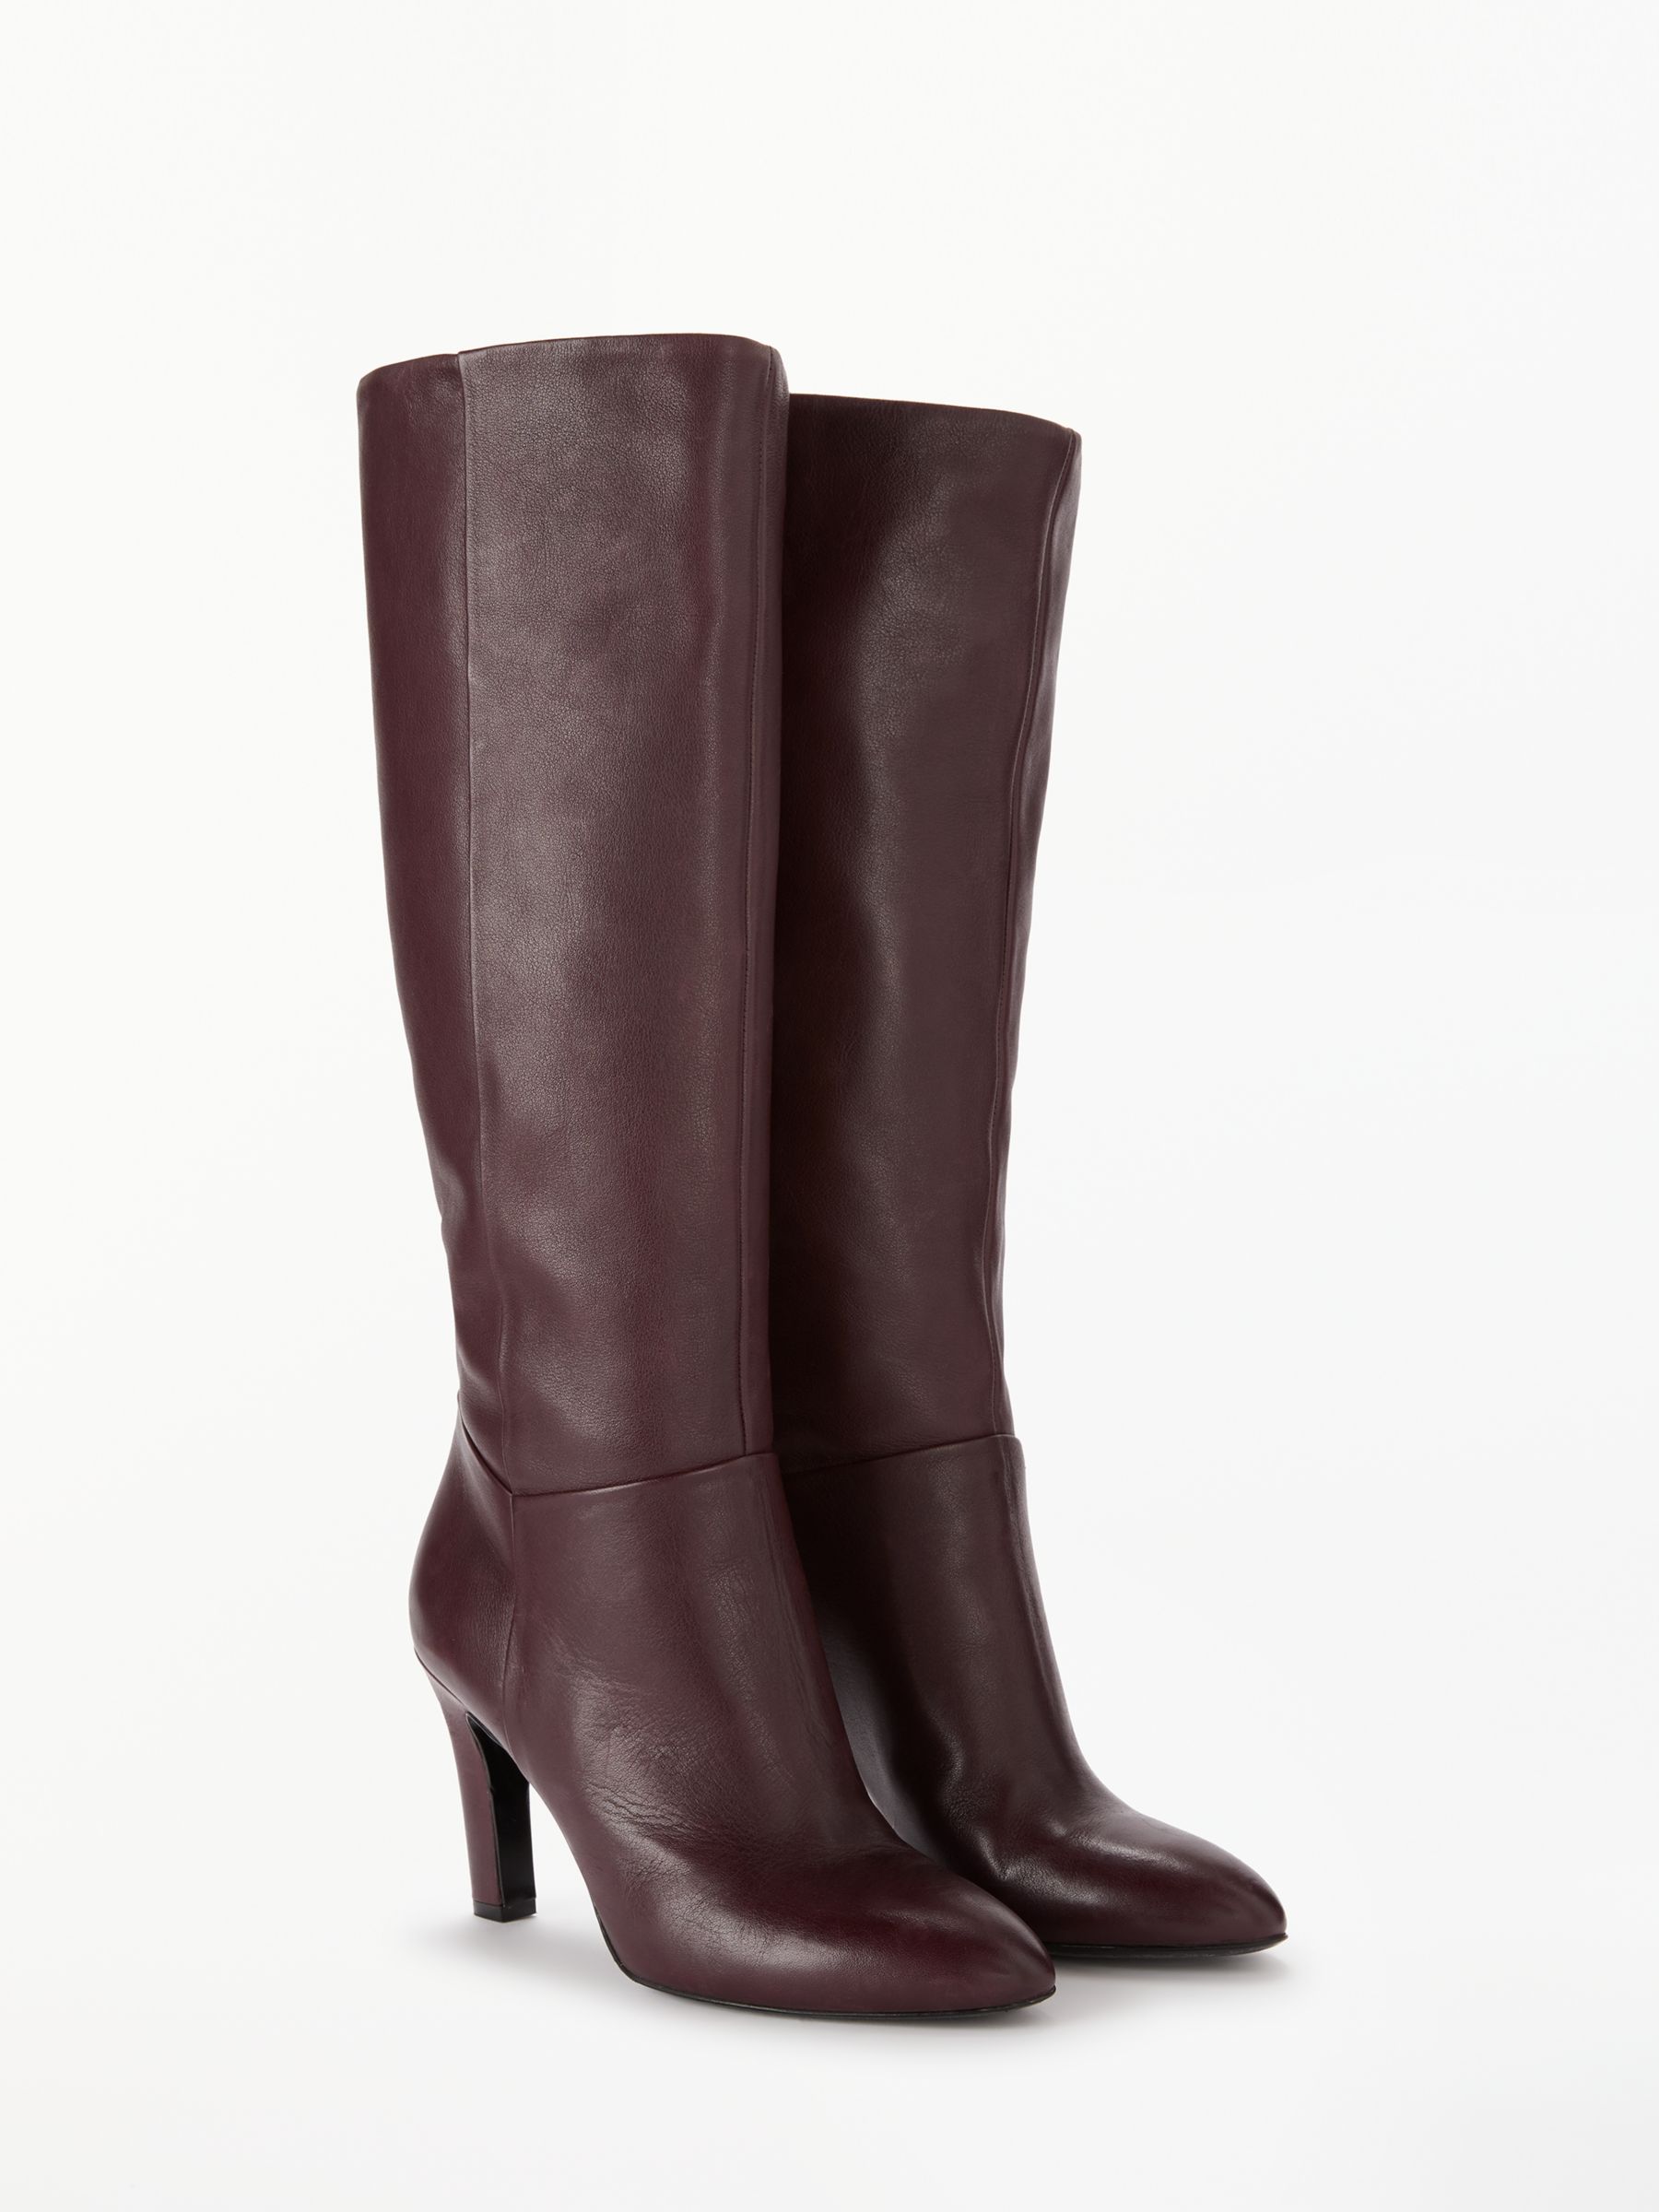 burgundy leather boots